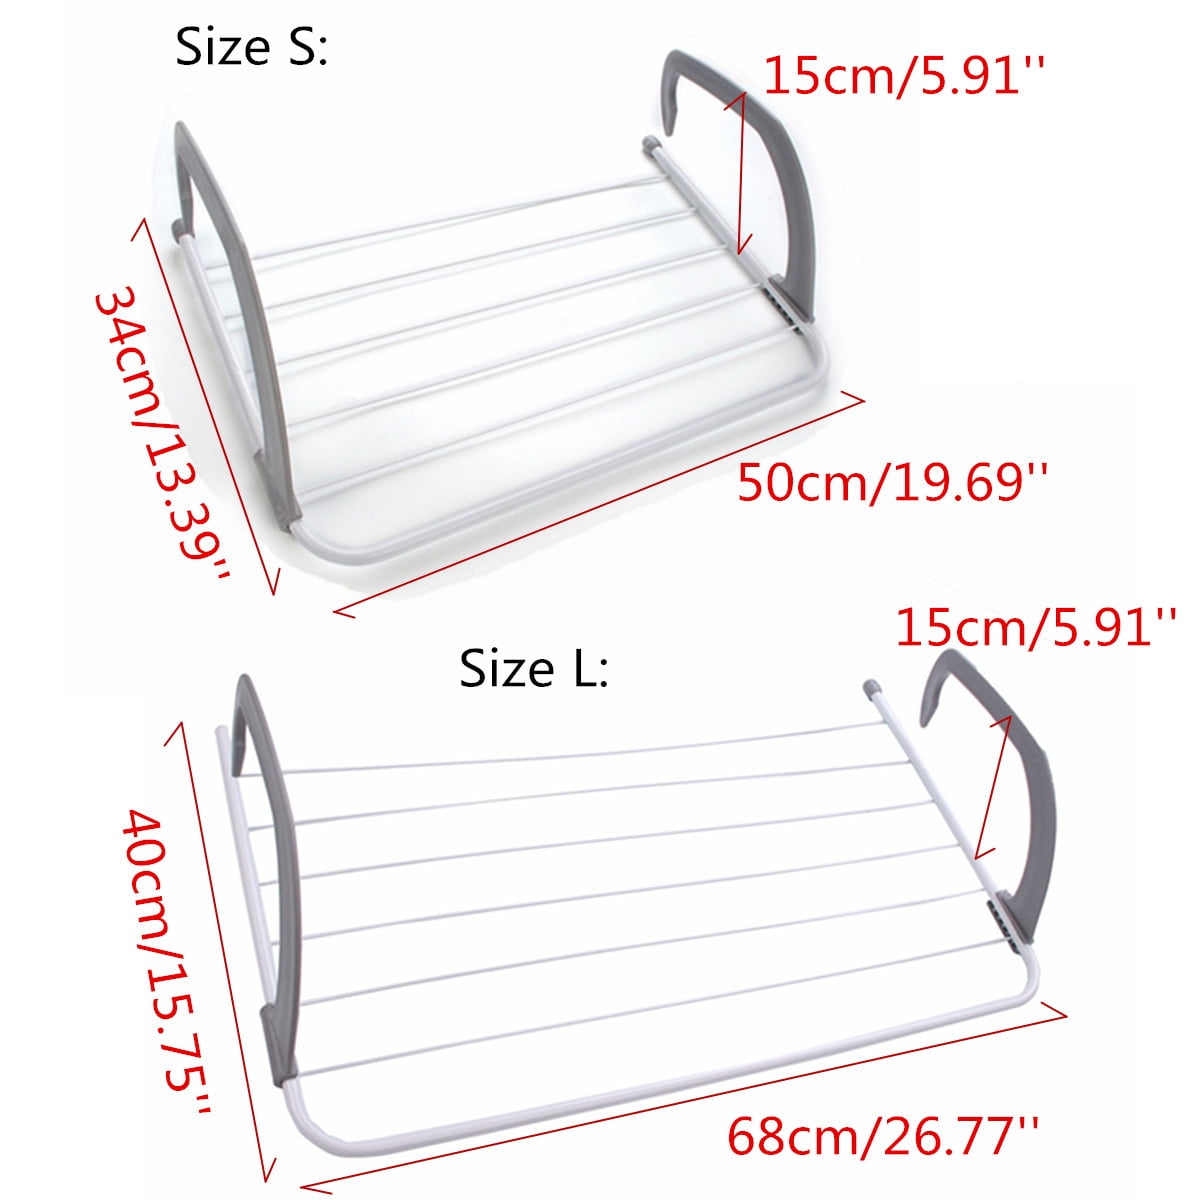 Youyijia 2 X Radiator Airer Clothes Rack 50cm Adjustable Washing Laundry Dryer Balcony Airer 